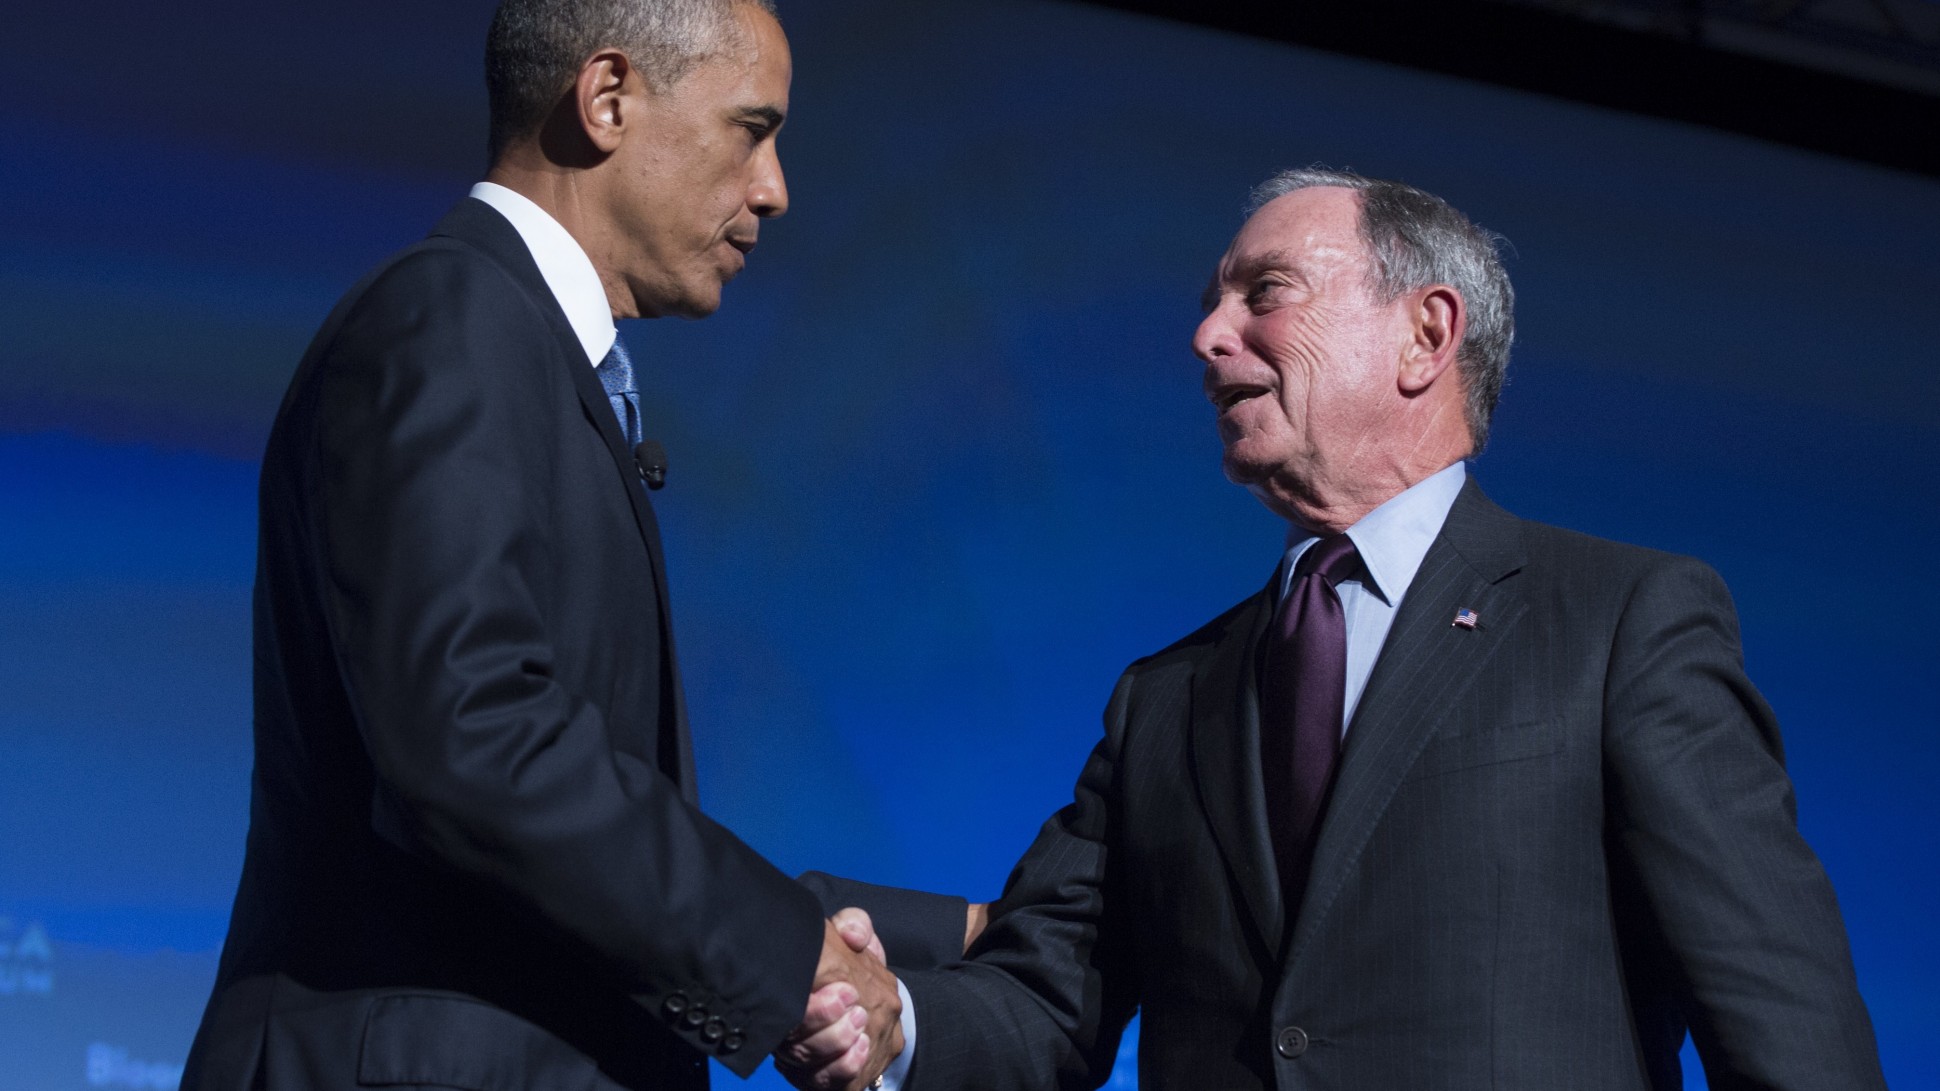 Image: Panderer-in-chief: Bloomberg promises taxpayer-funded free gender surgery and housing to transgenders